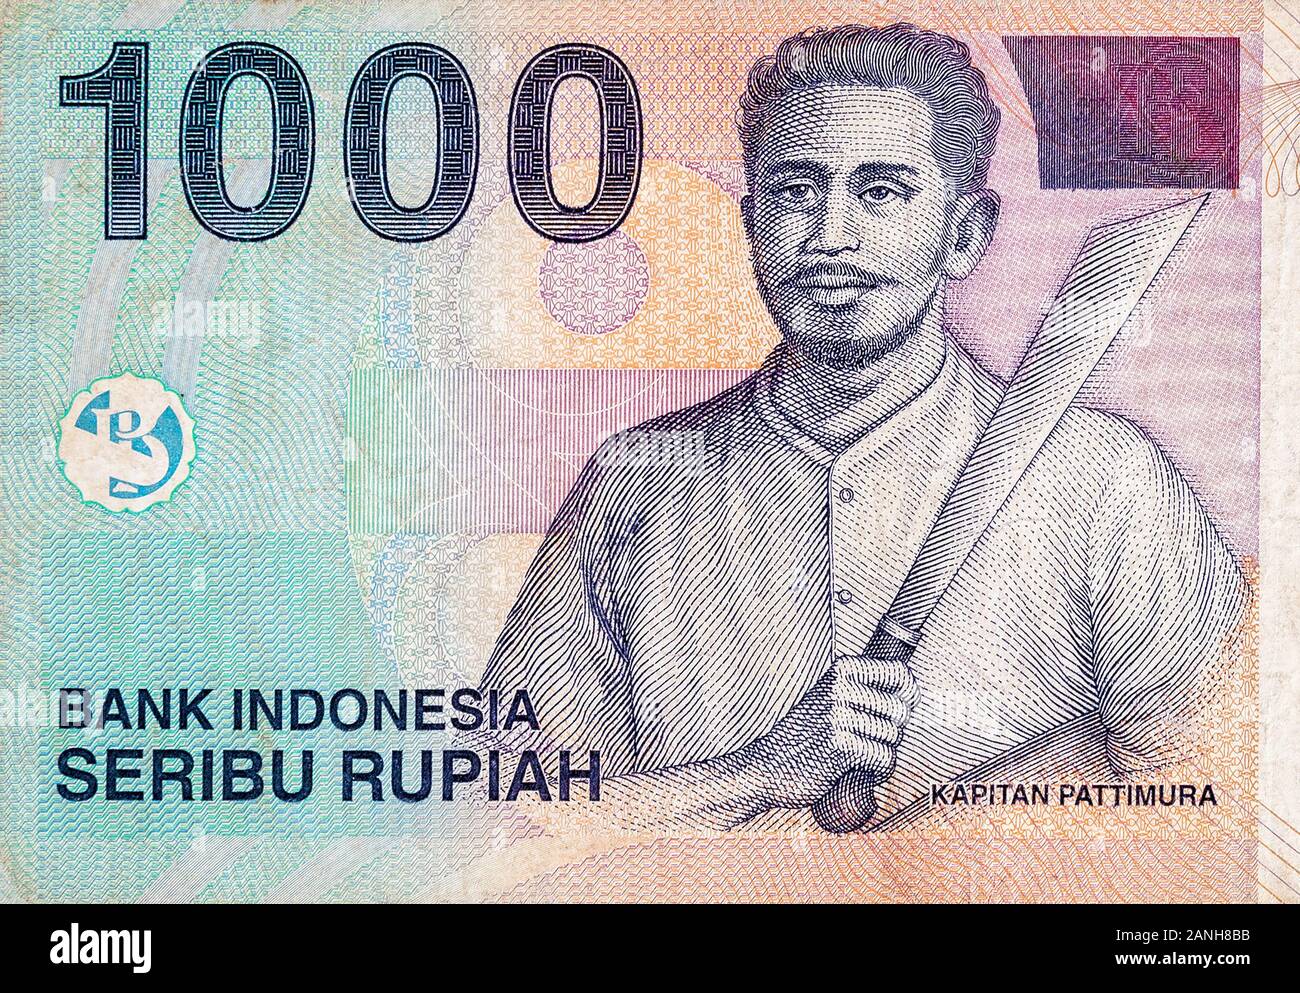 Kapitan Pattimura portrait on Indonesia 1000 rupiah bank note, former currency of Indonesia. Colored bill close up fragment Stock Photo